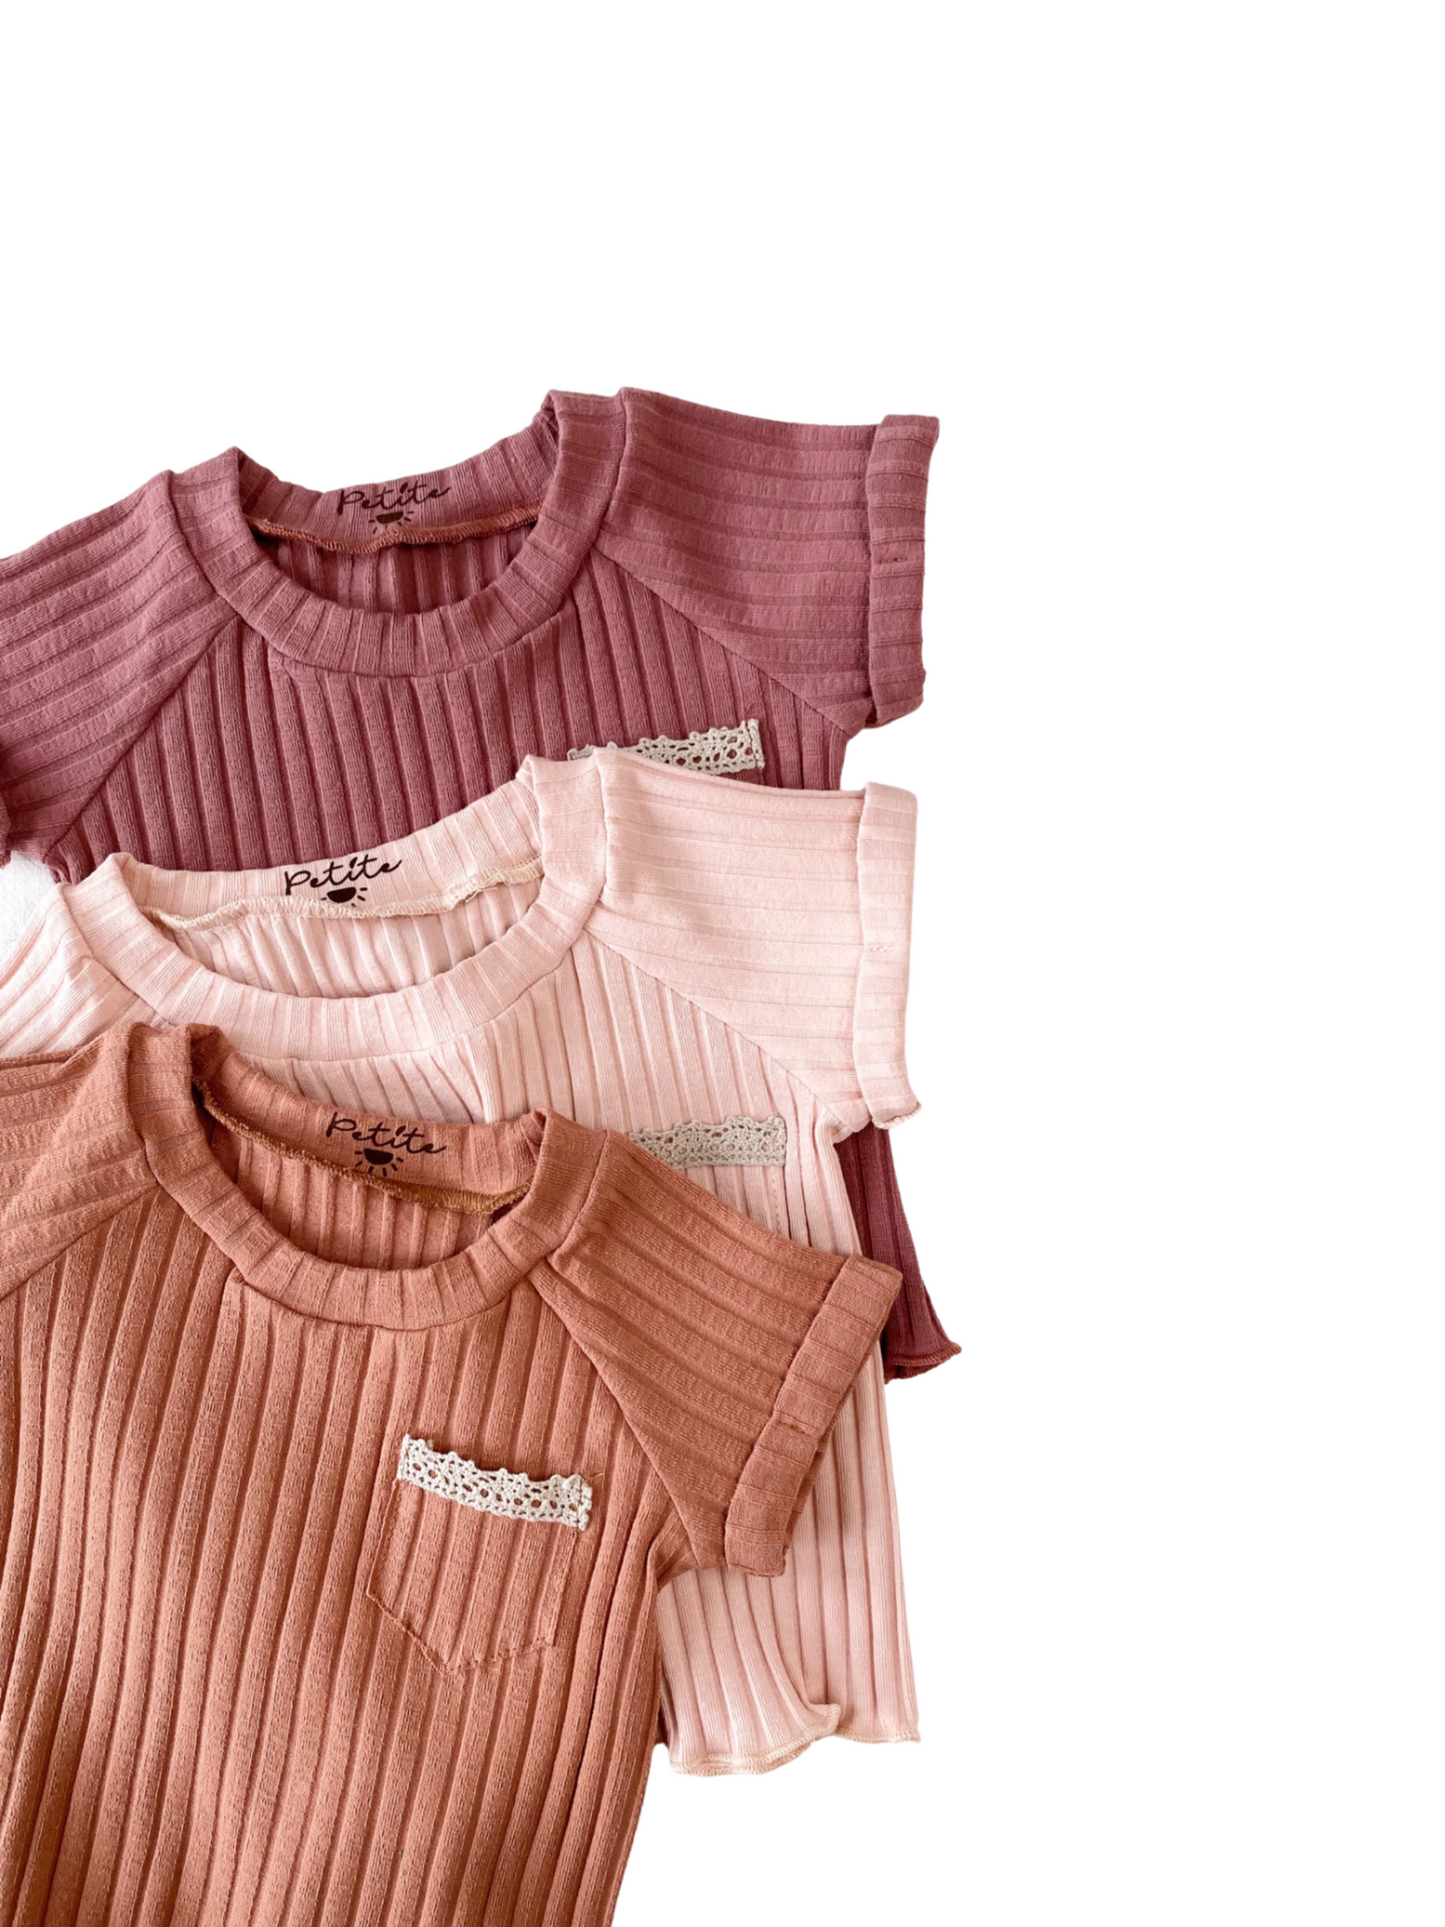 Baby cotton t-shirt / wide ribbed - girly tones